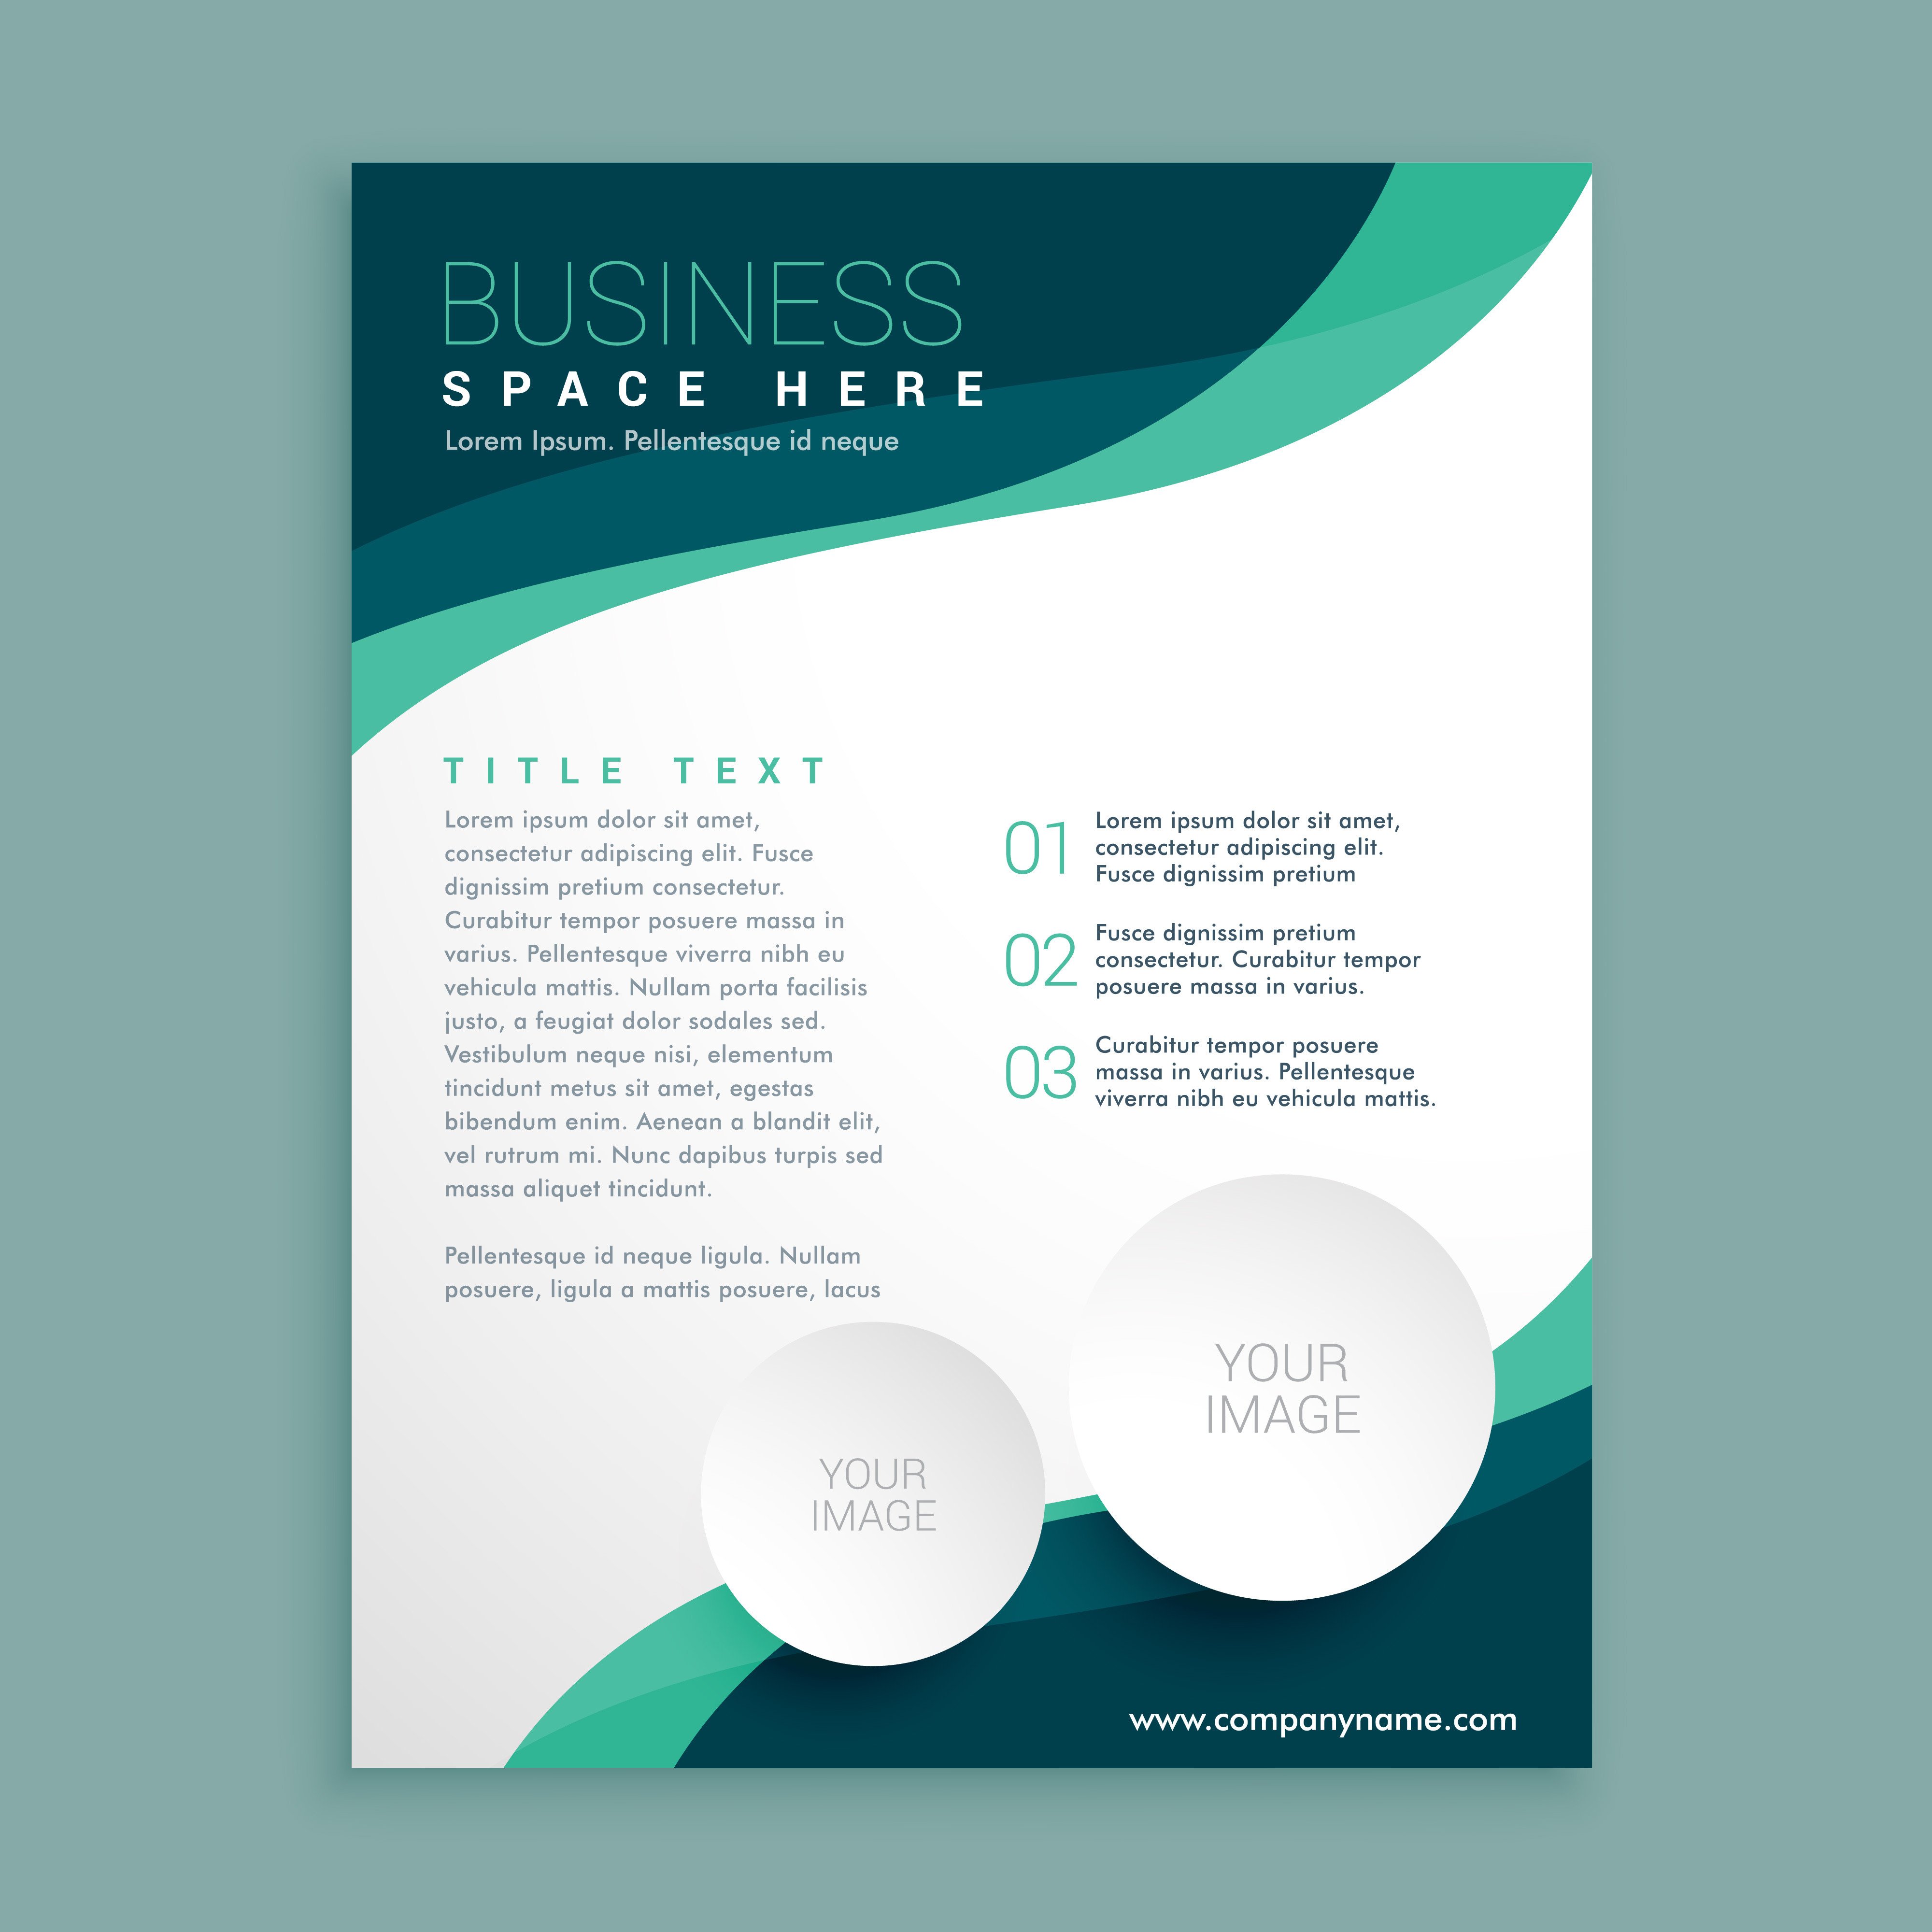 Pamphlet Free Vector Art 19 238 Free Downloads